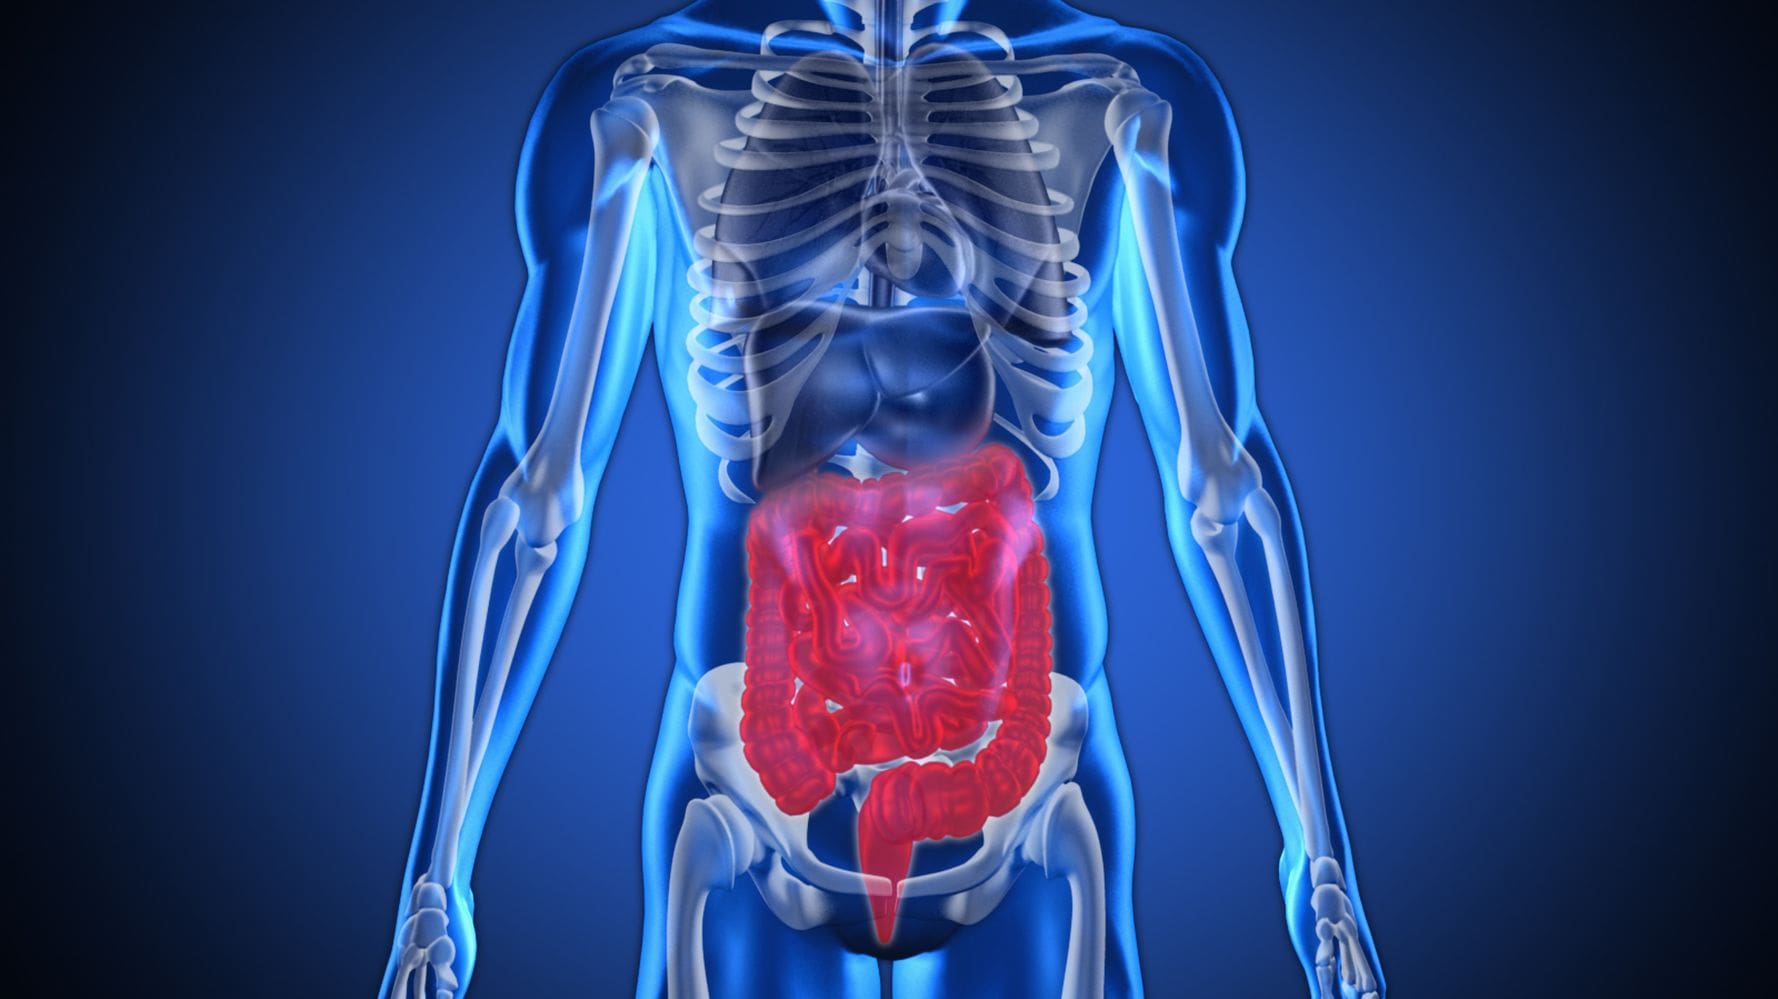 An Overview of Natural Ways to Cleanse the Colon